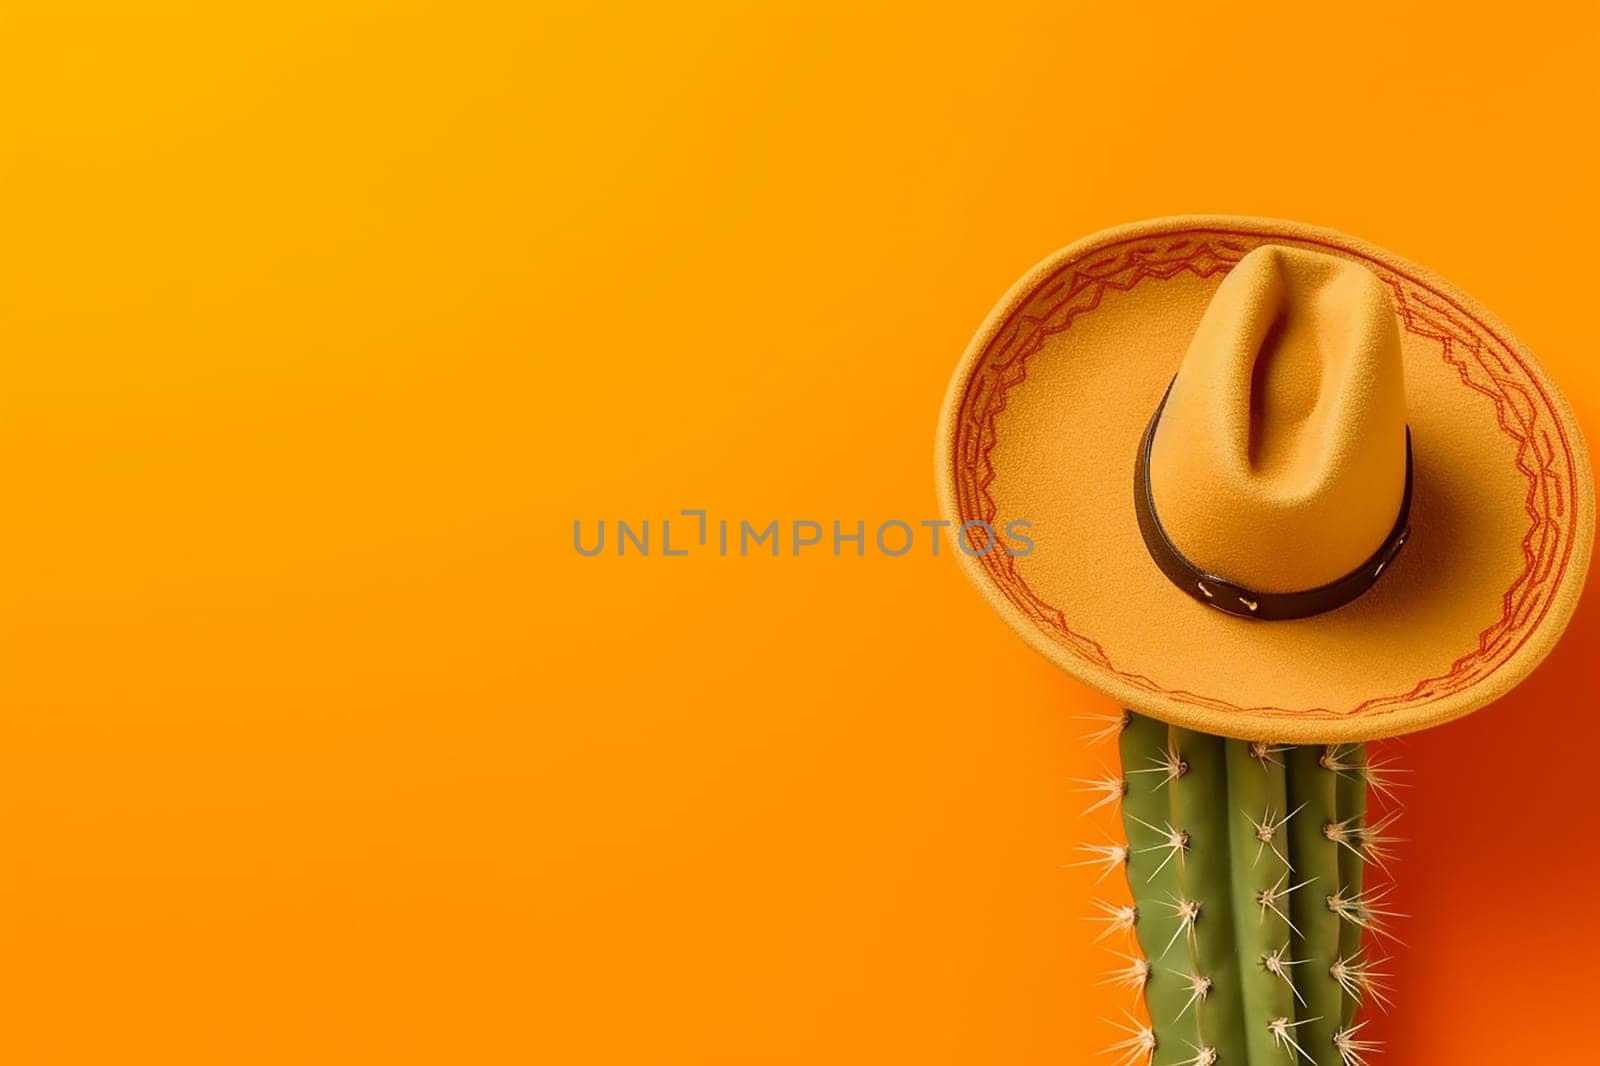 Sombrero on a cactus against an orange background.